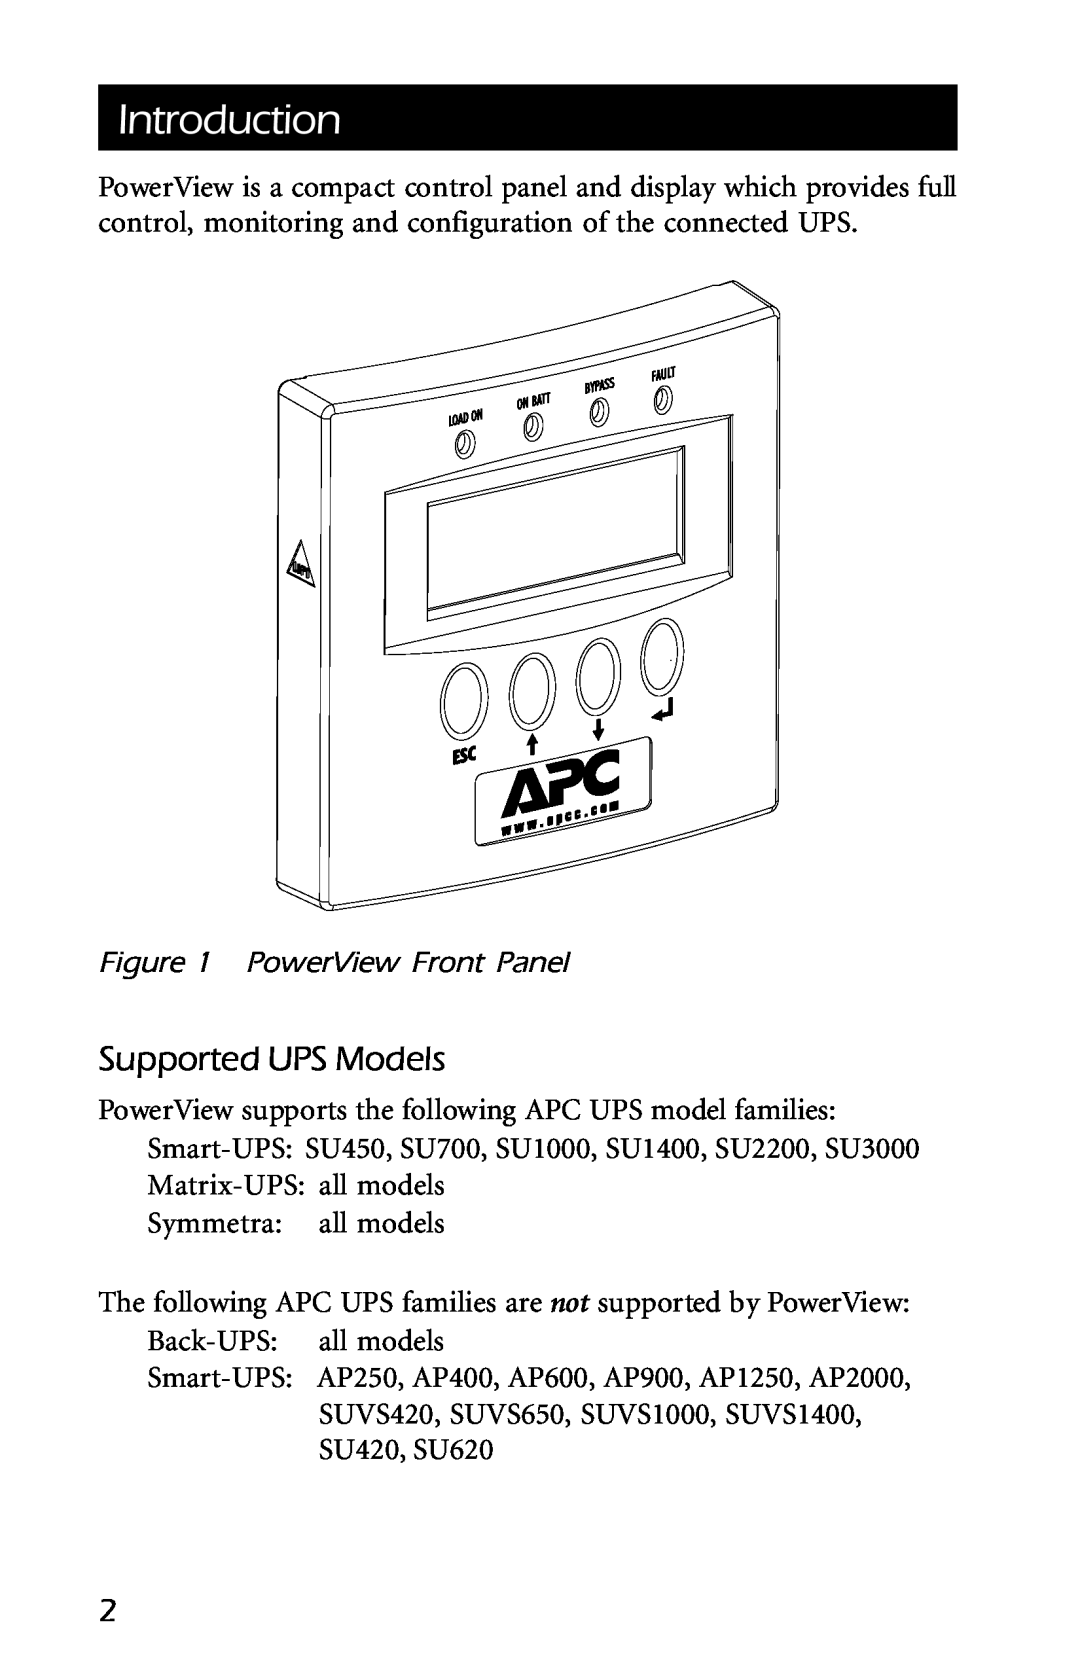 American Power Conversion AP9215 user manual Introduction, Supported UPS Models, PowerView Front Panel 